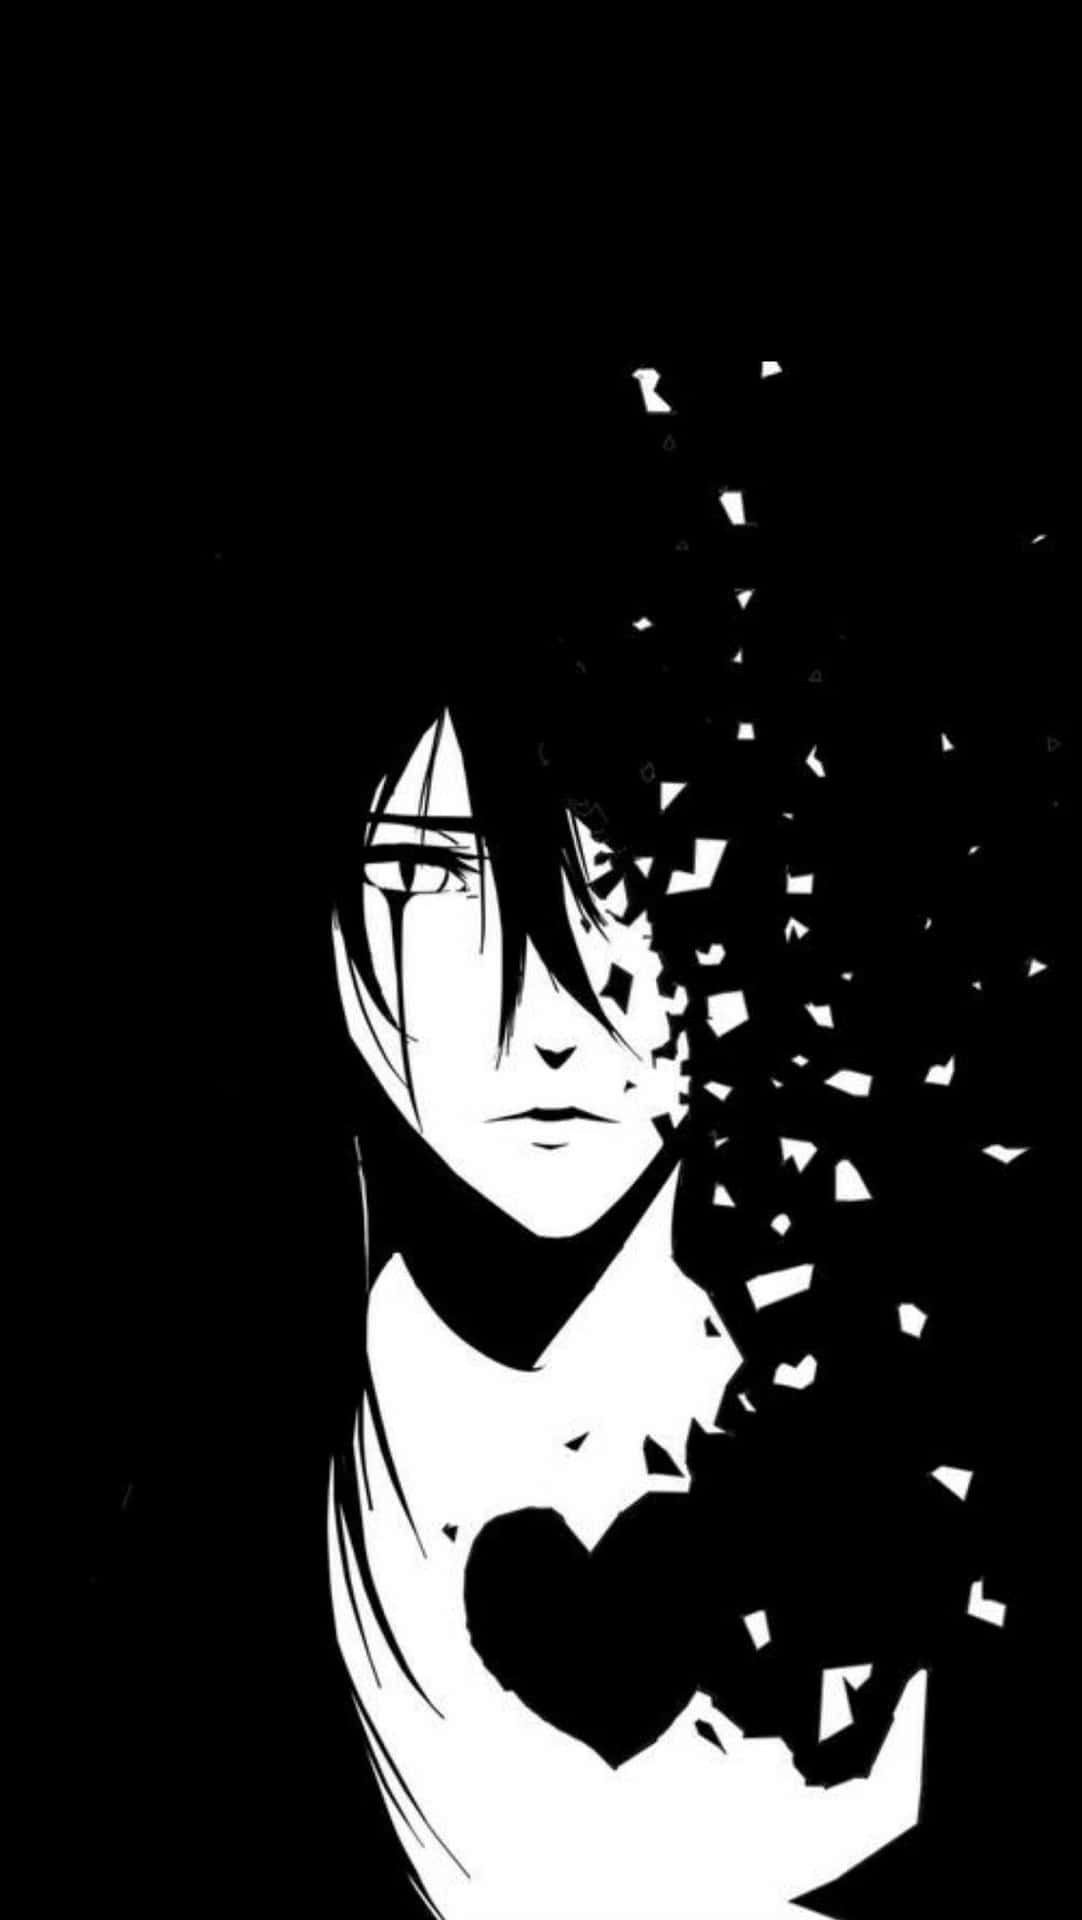 Download Black And White Anime PFP Aesthetic Wallpaper